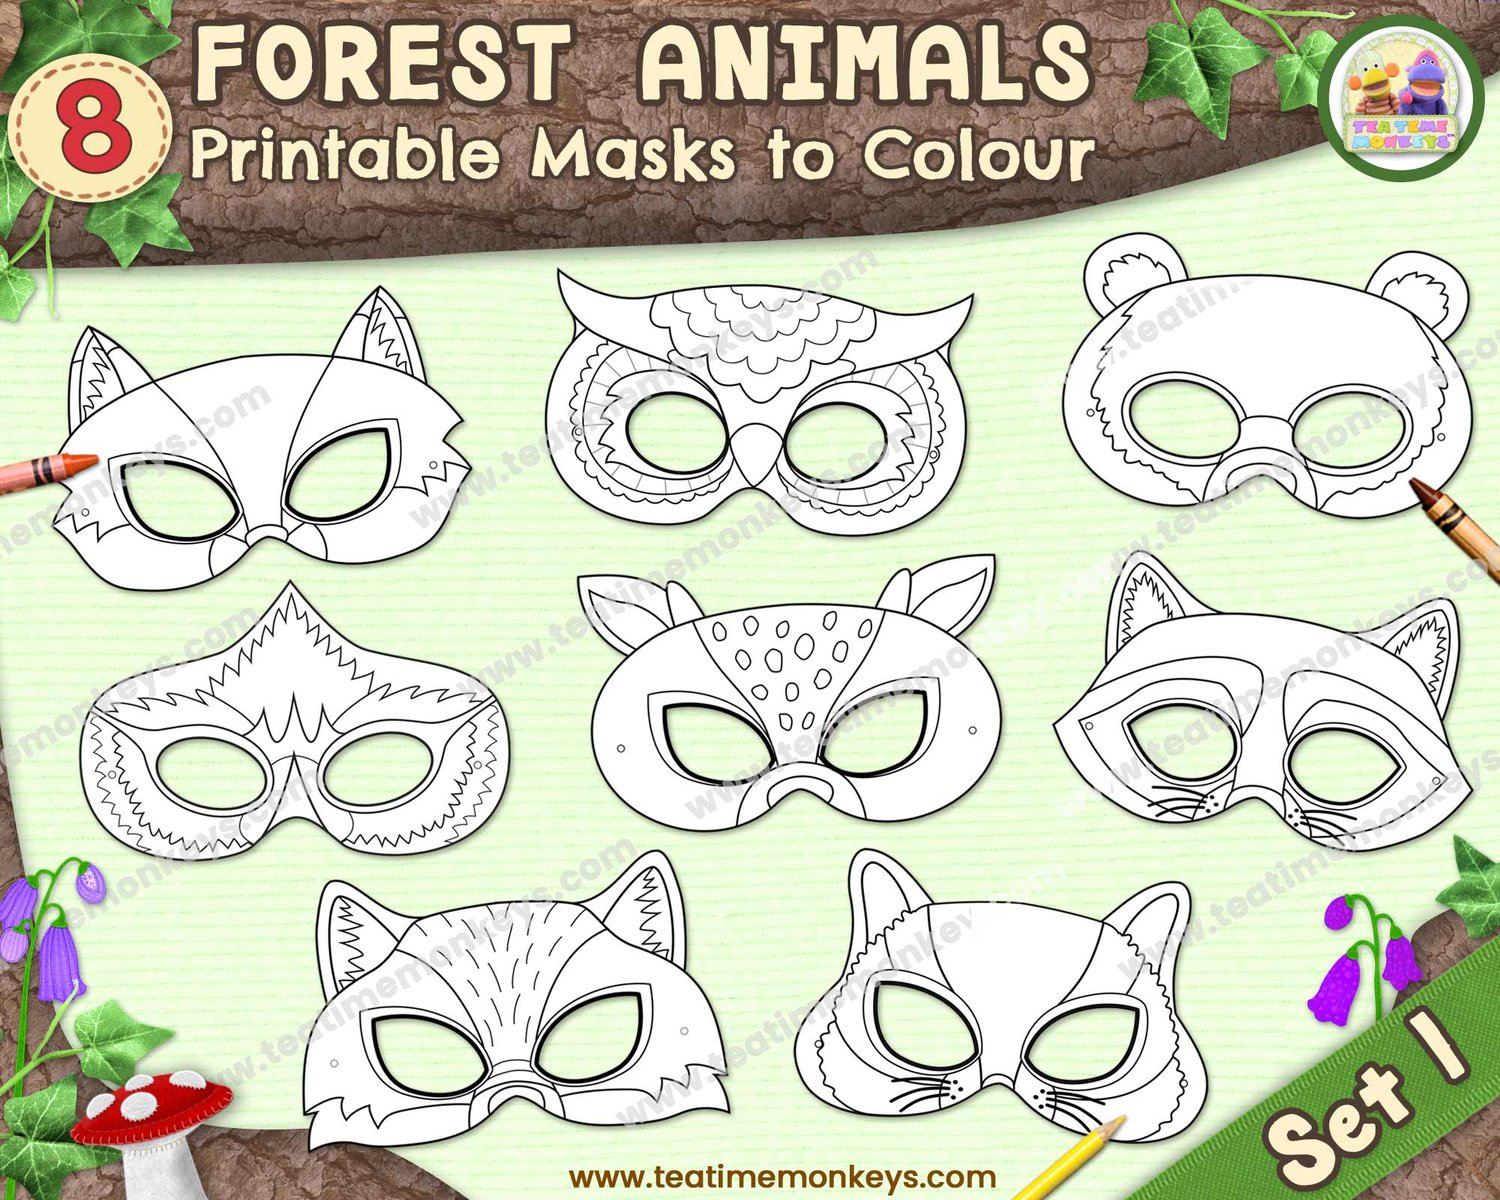 Fox Paper Mask Printable Woodland Forest Animal Costume Craft